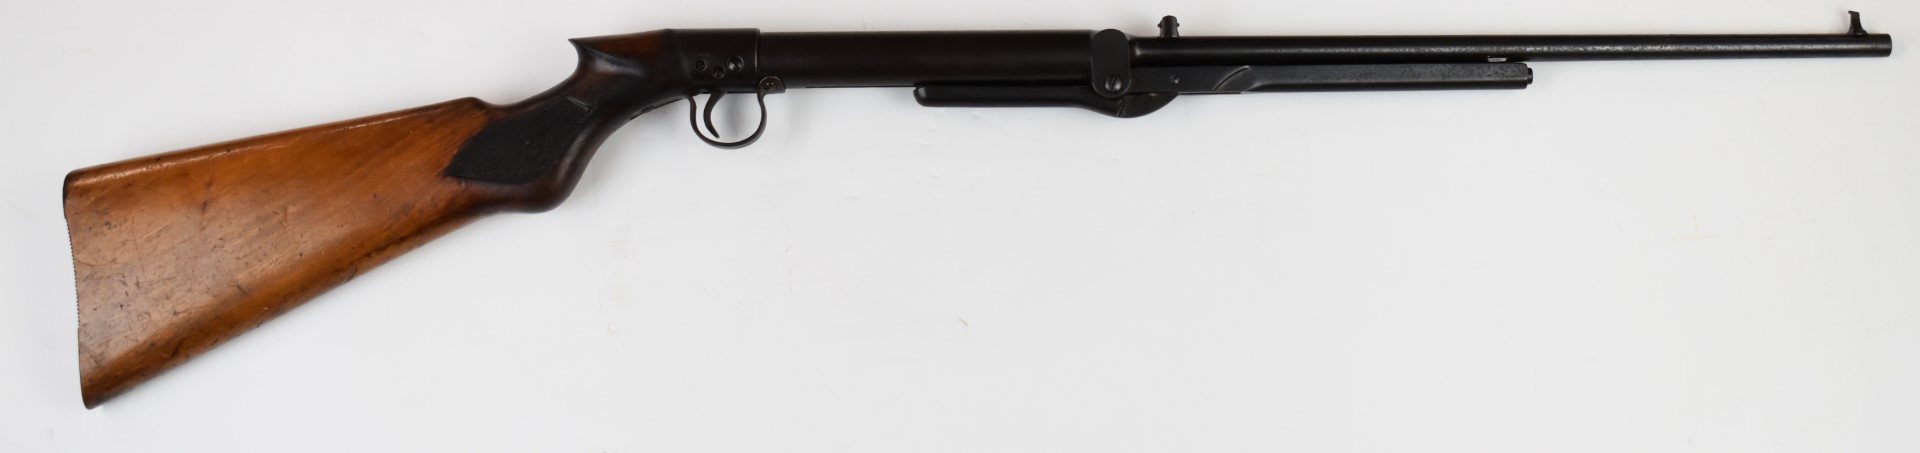 BSA Standard No 1 Light or Ladies .177 under-lever air rifle with chequered semi-pistol grip and - Image 2 of 7